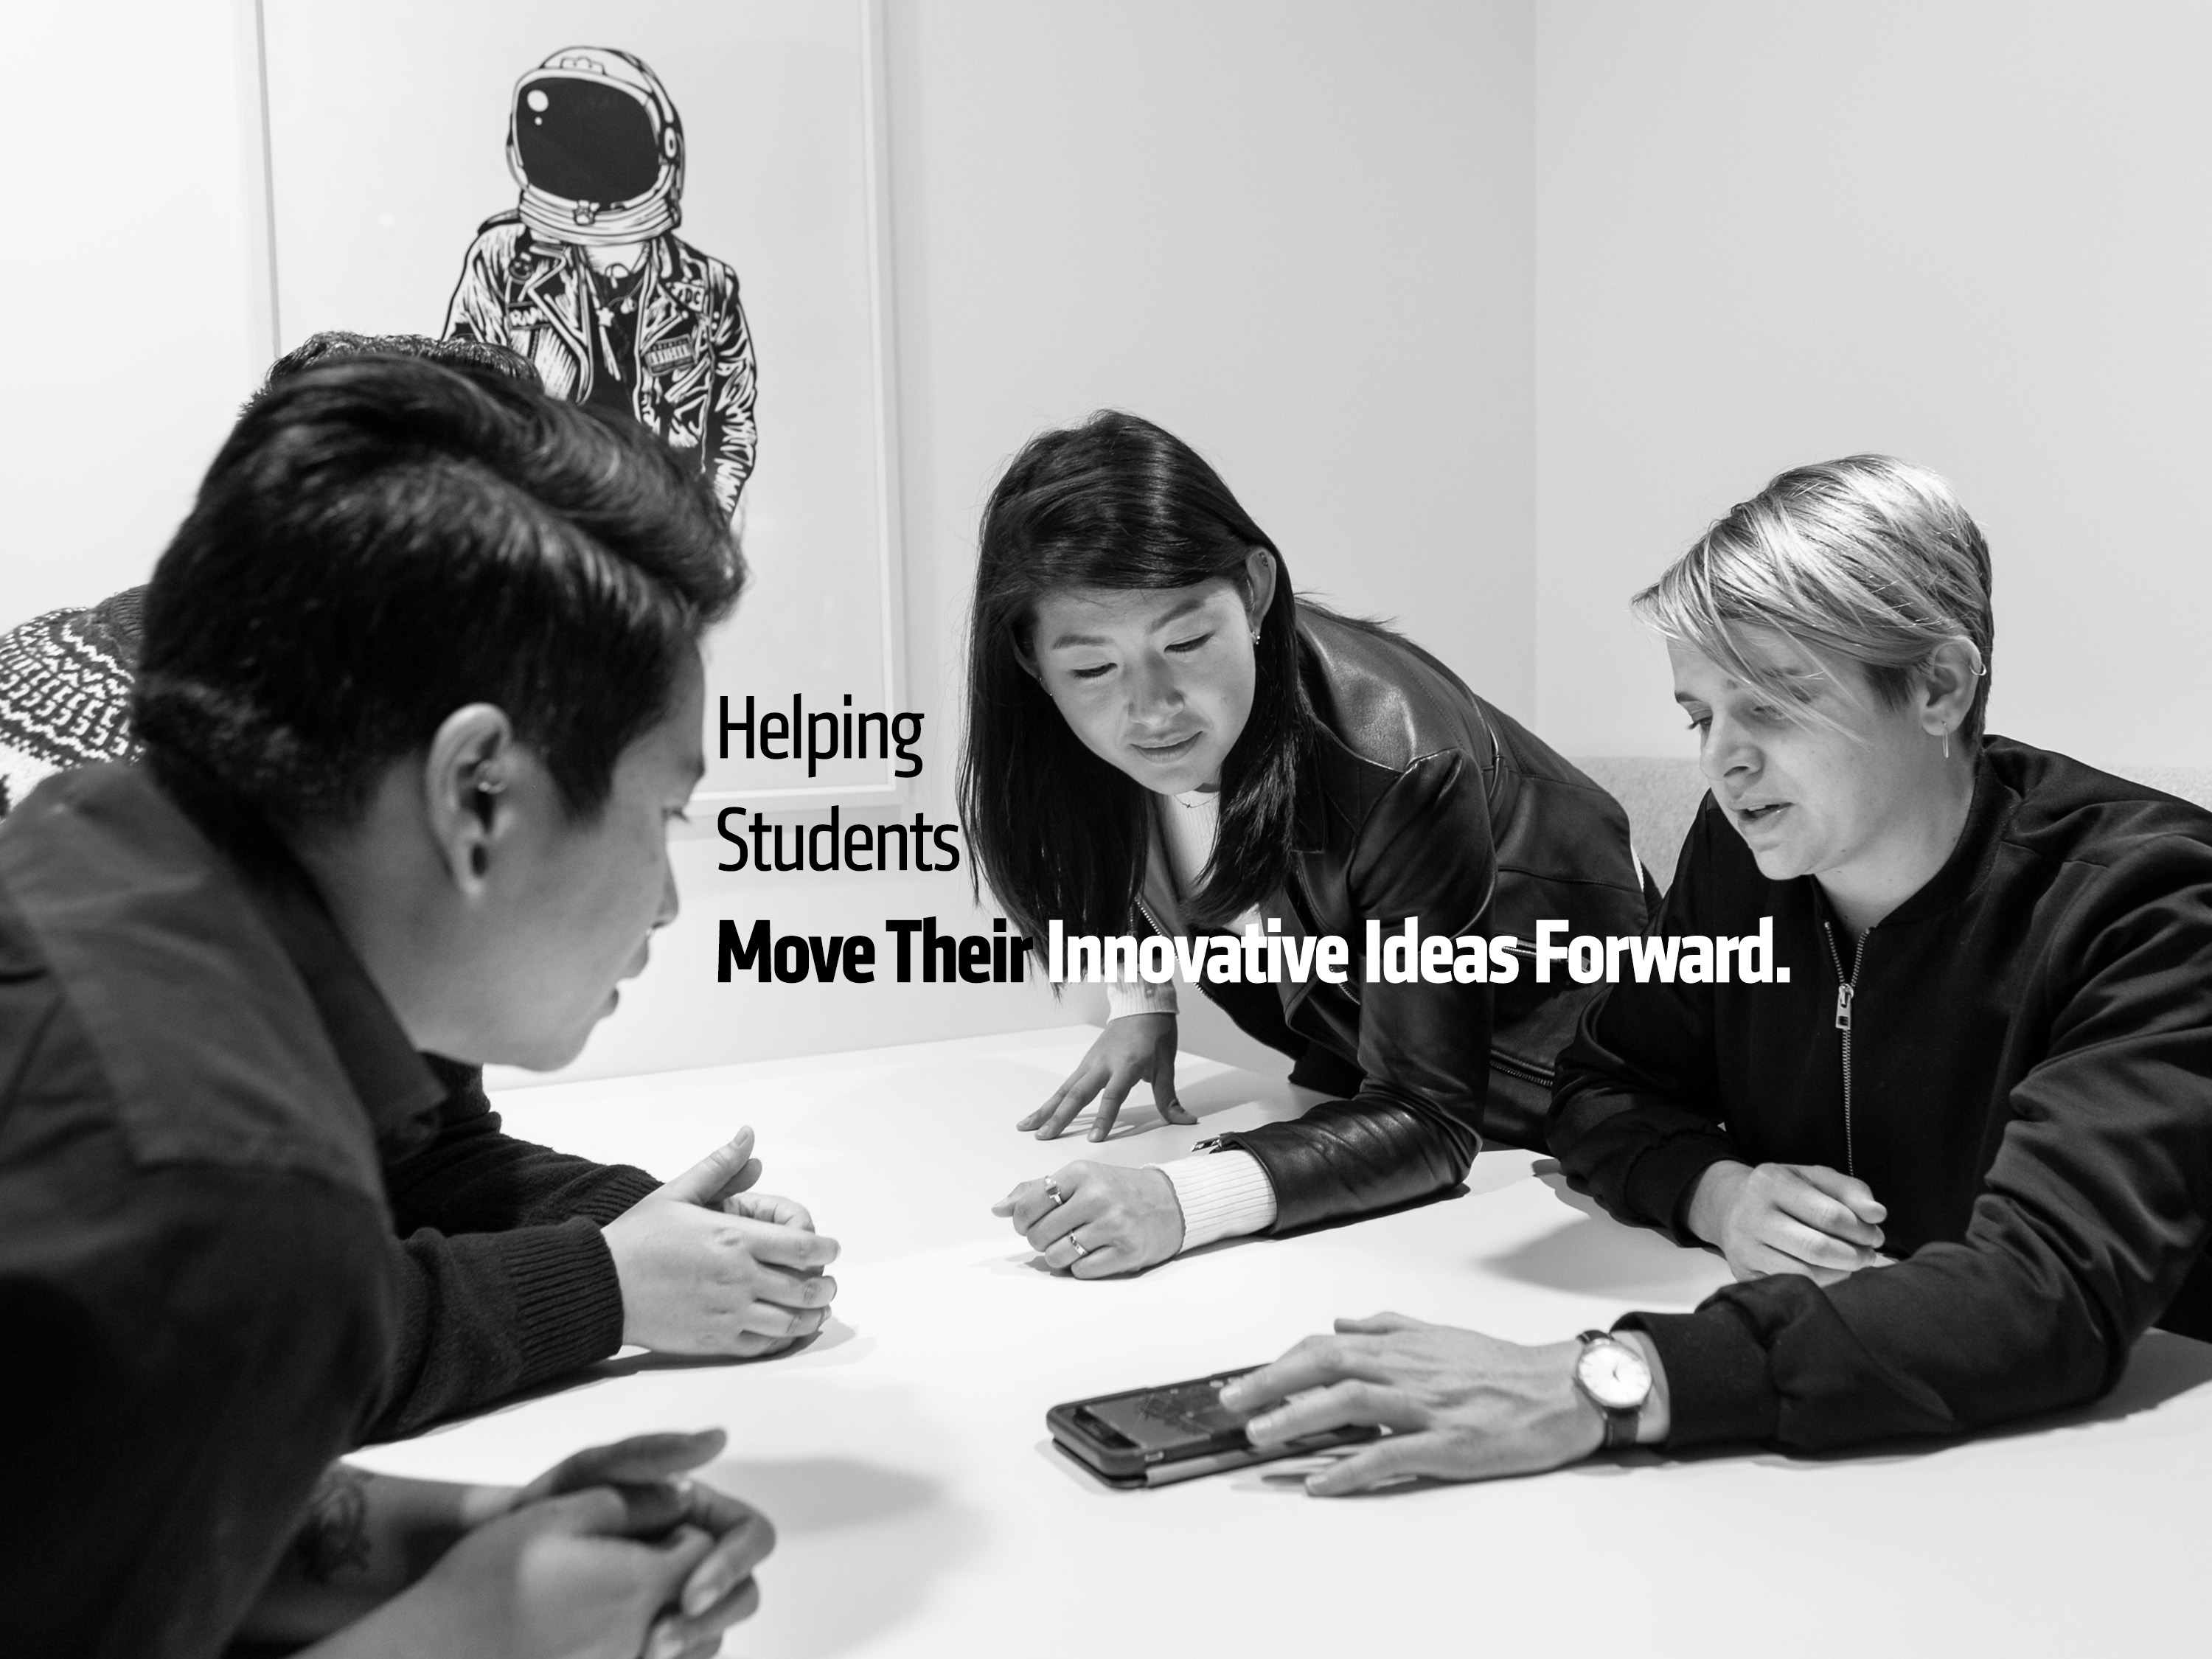 four students having a discussion with text overlaid saying "Helping Students Move Their Ideas Forward."